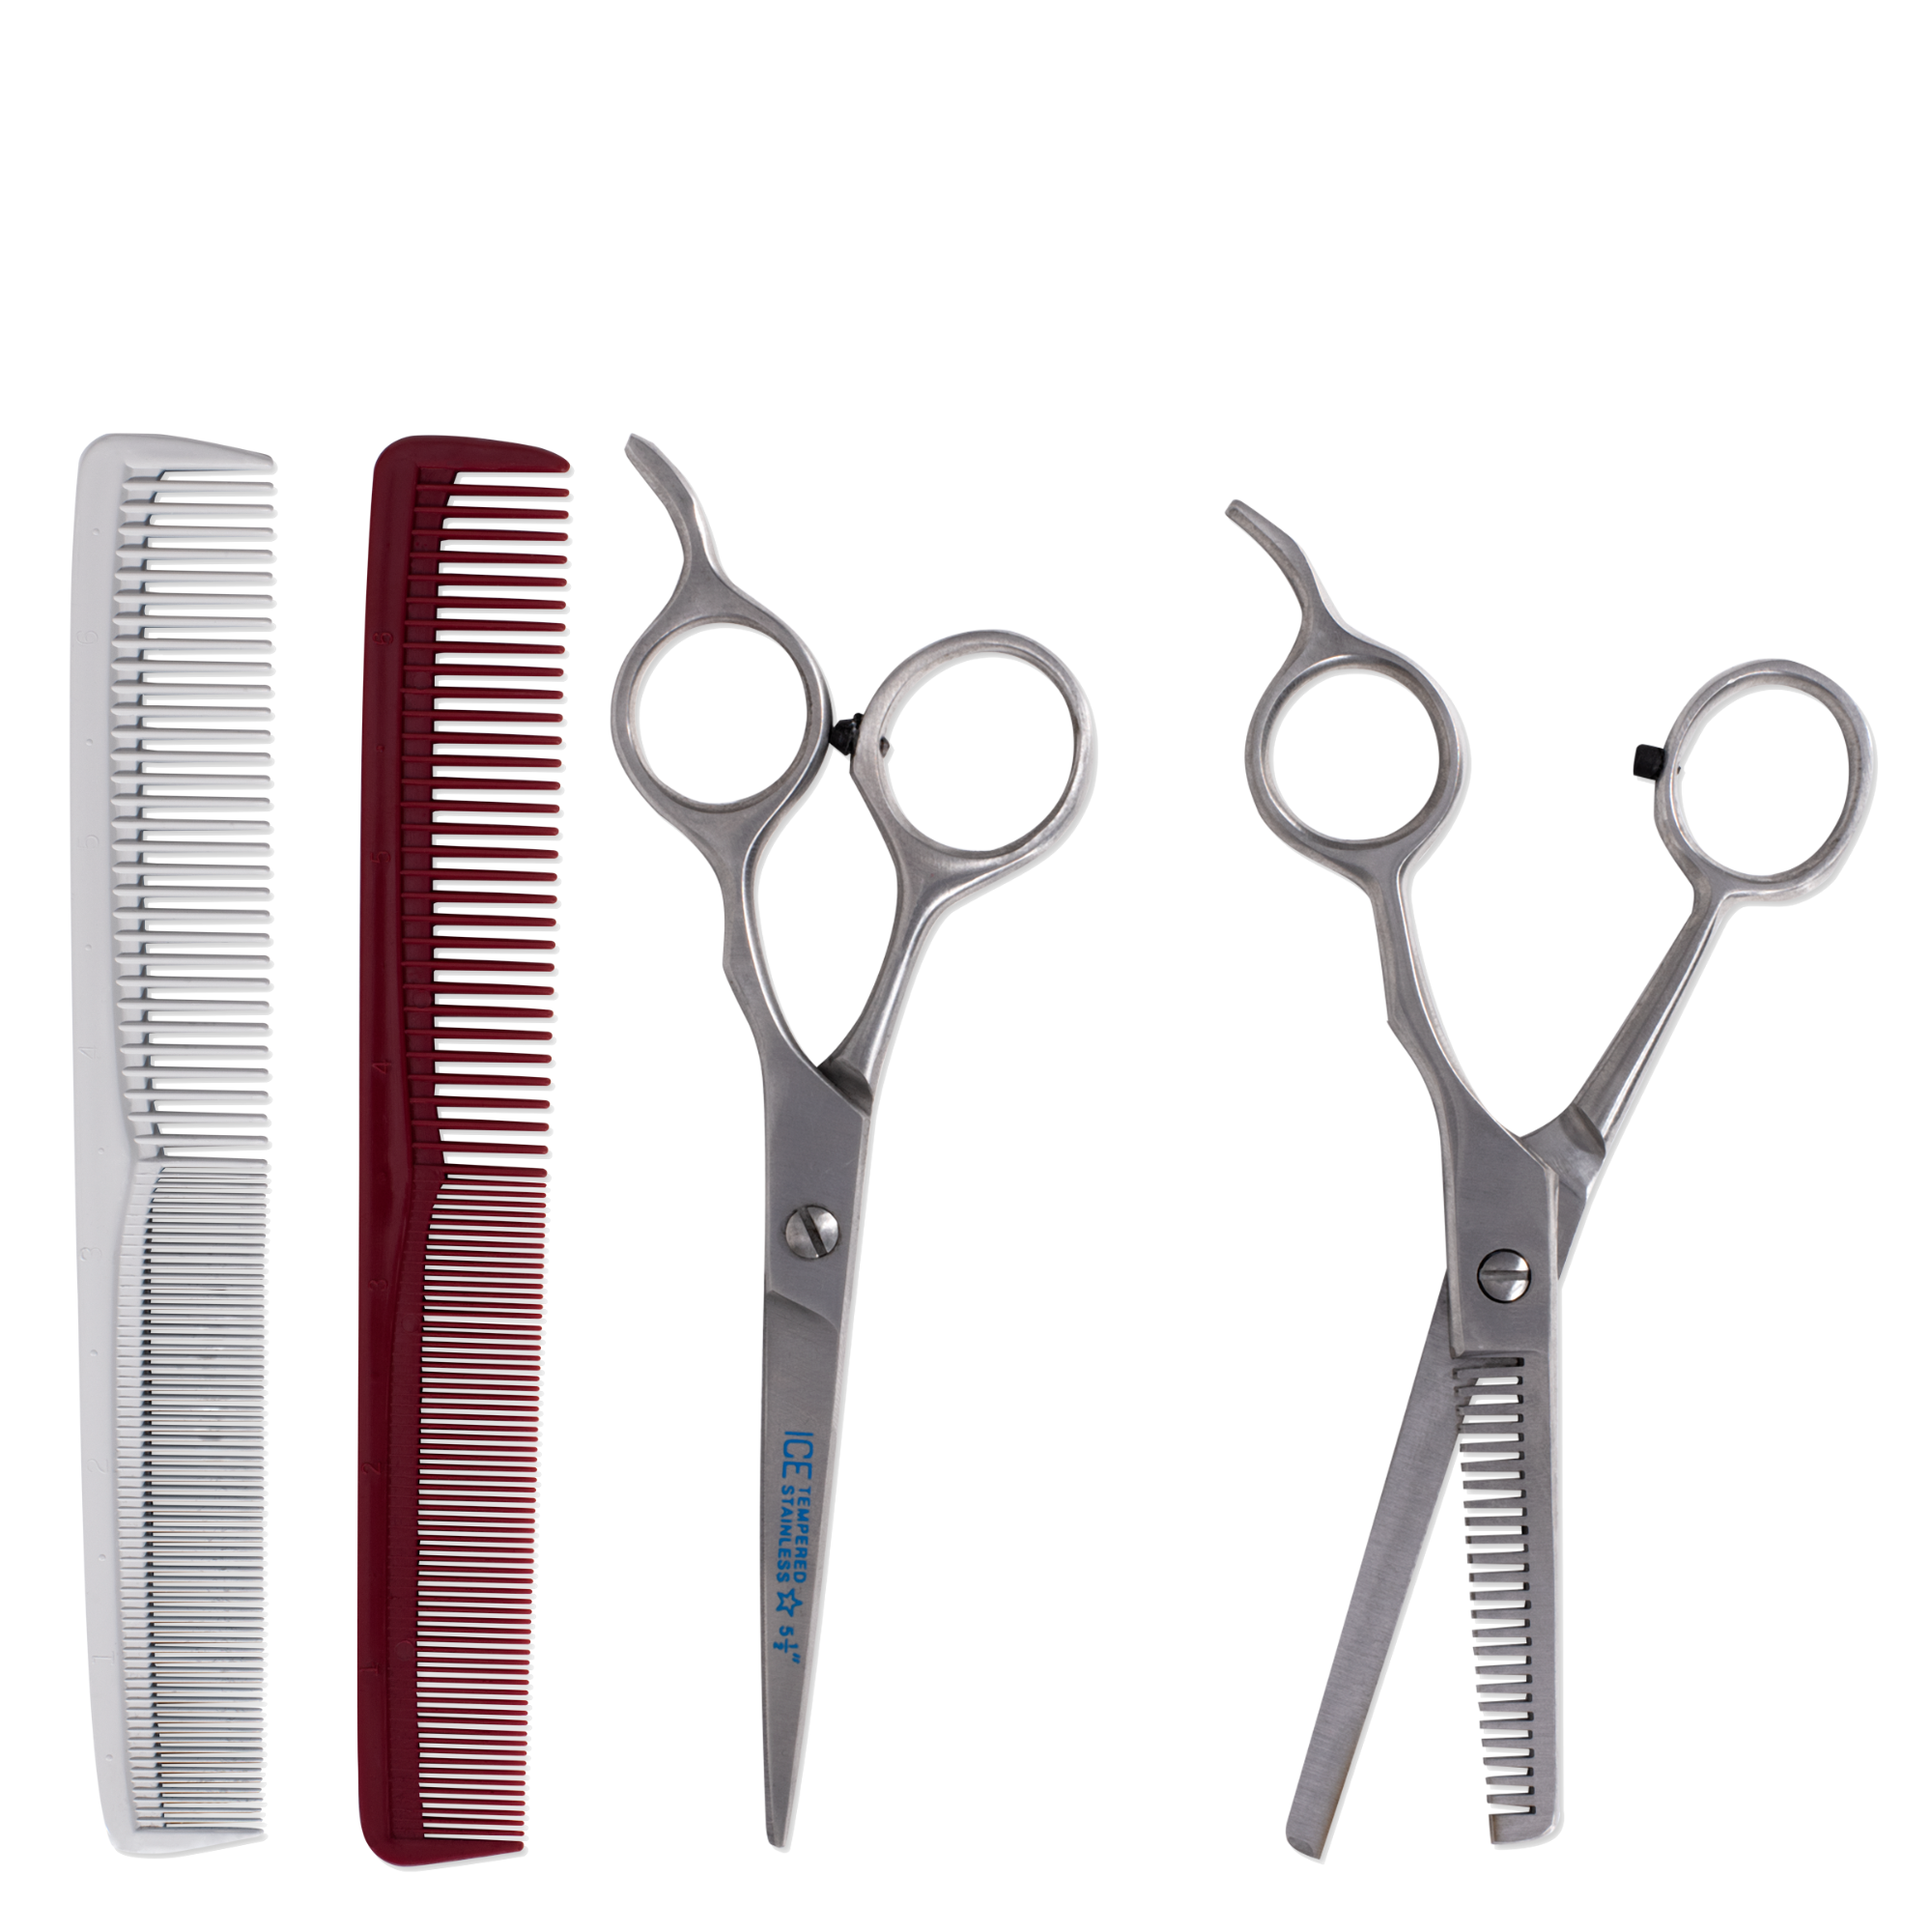 6" Cutting and Styling Kit, Right-Handed, 4 pc.